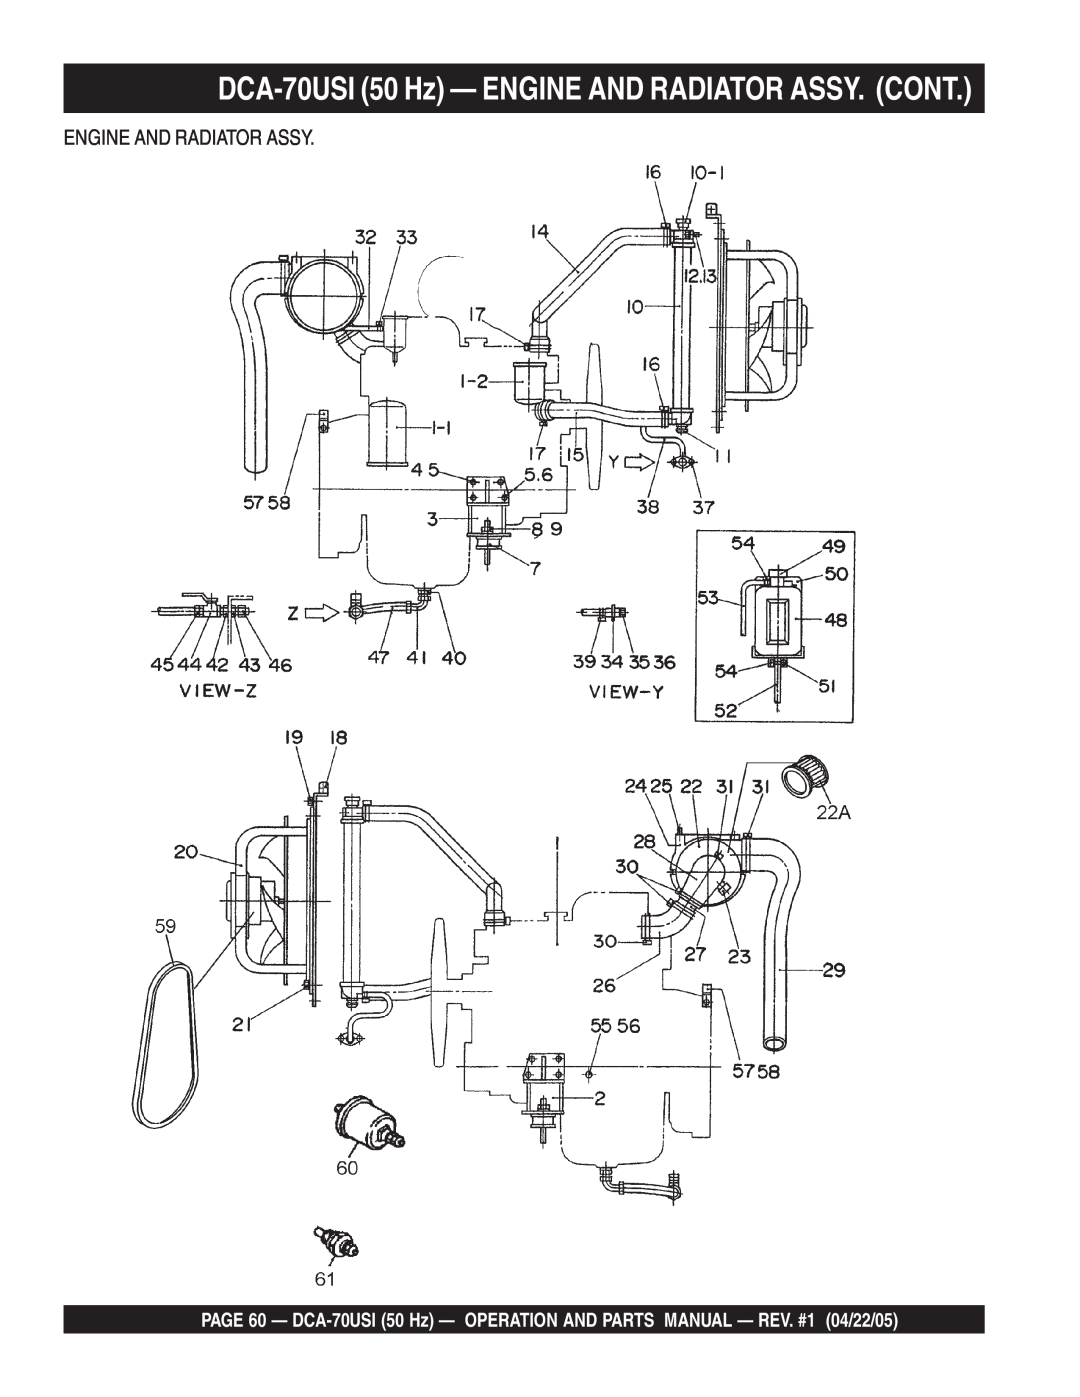 Multiquip operation manual DCA-70USI50 Hz — ENGINE AND RADIATOR ASSY. CONT 